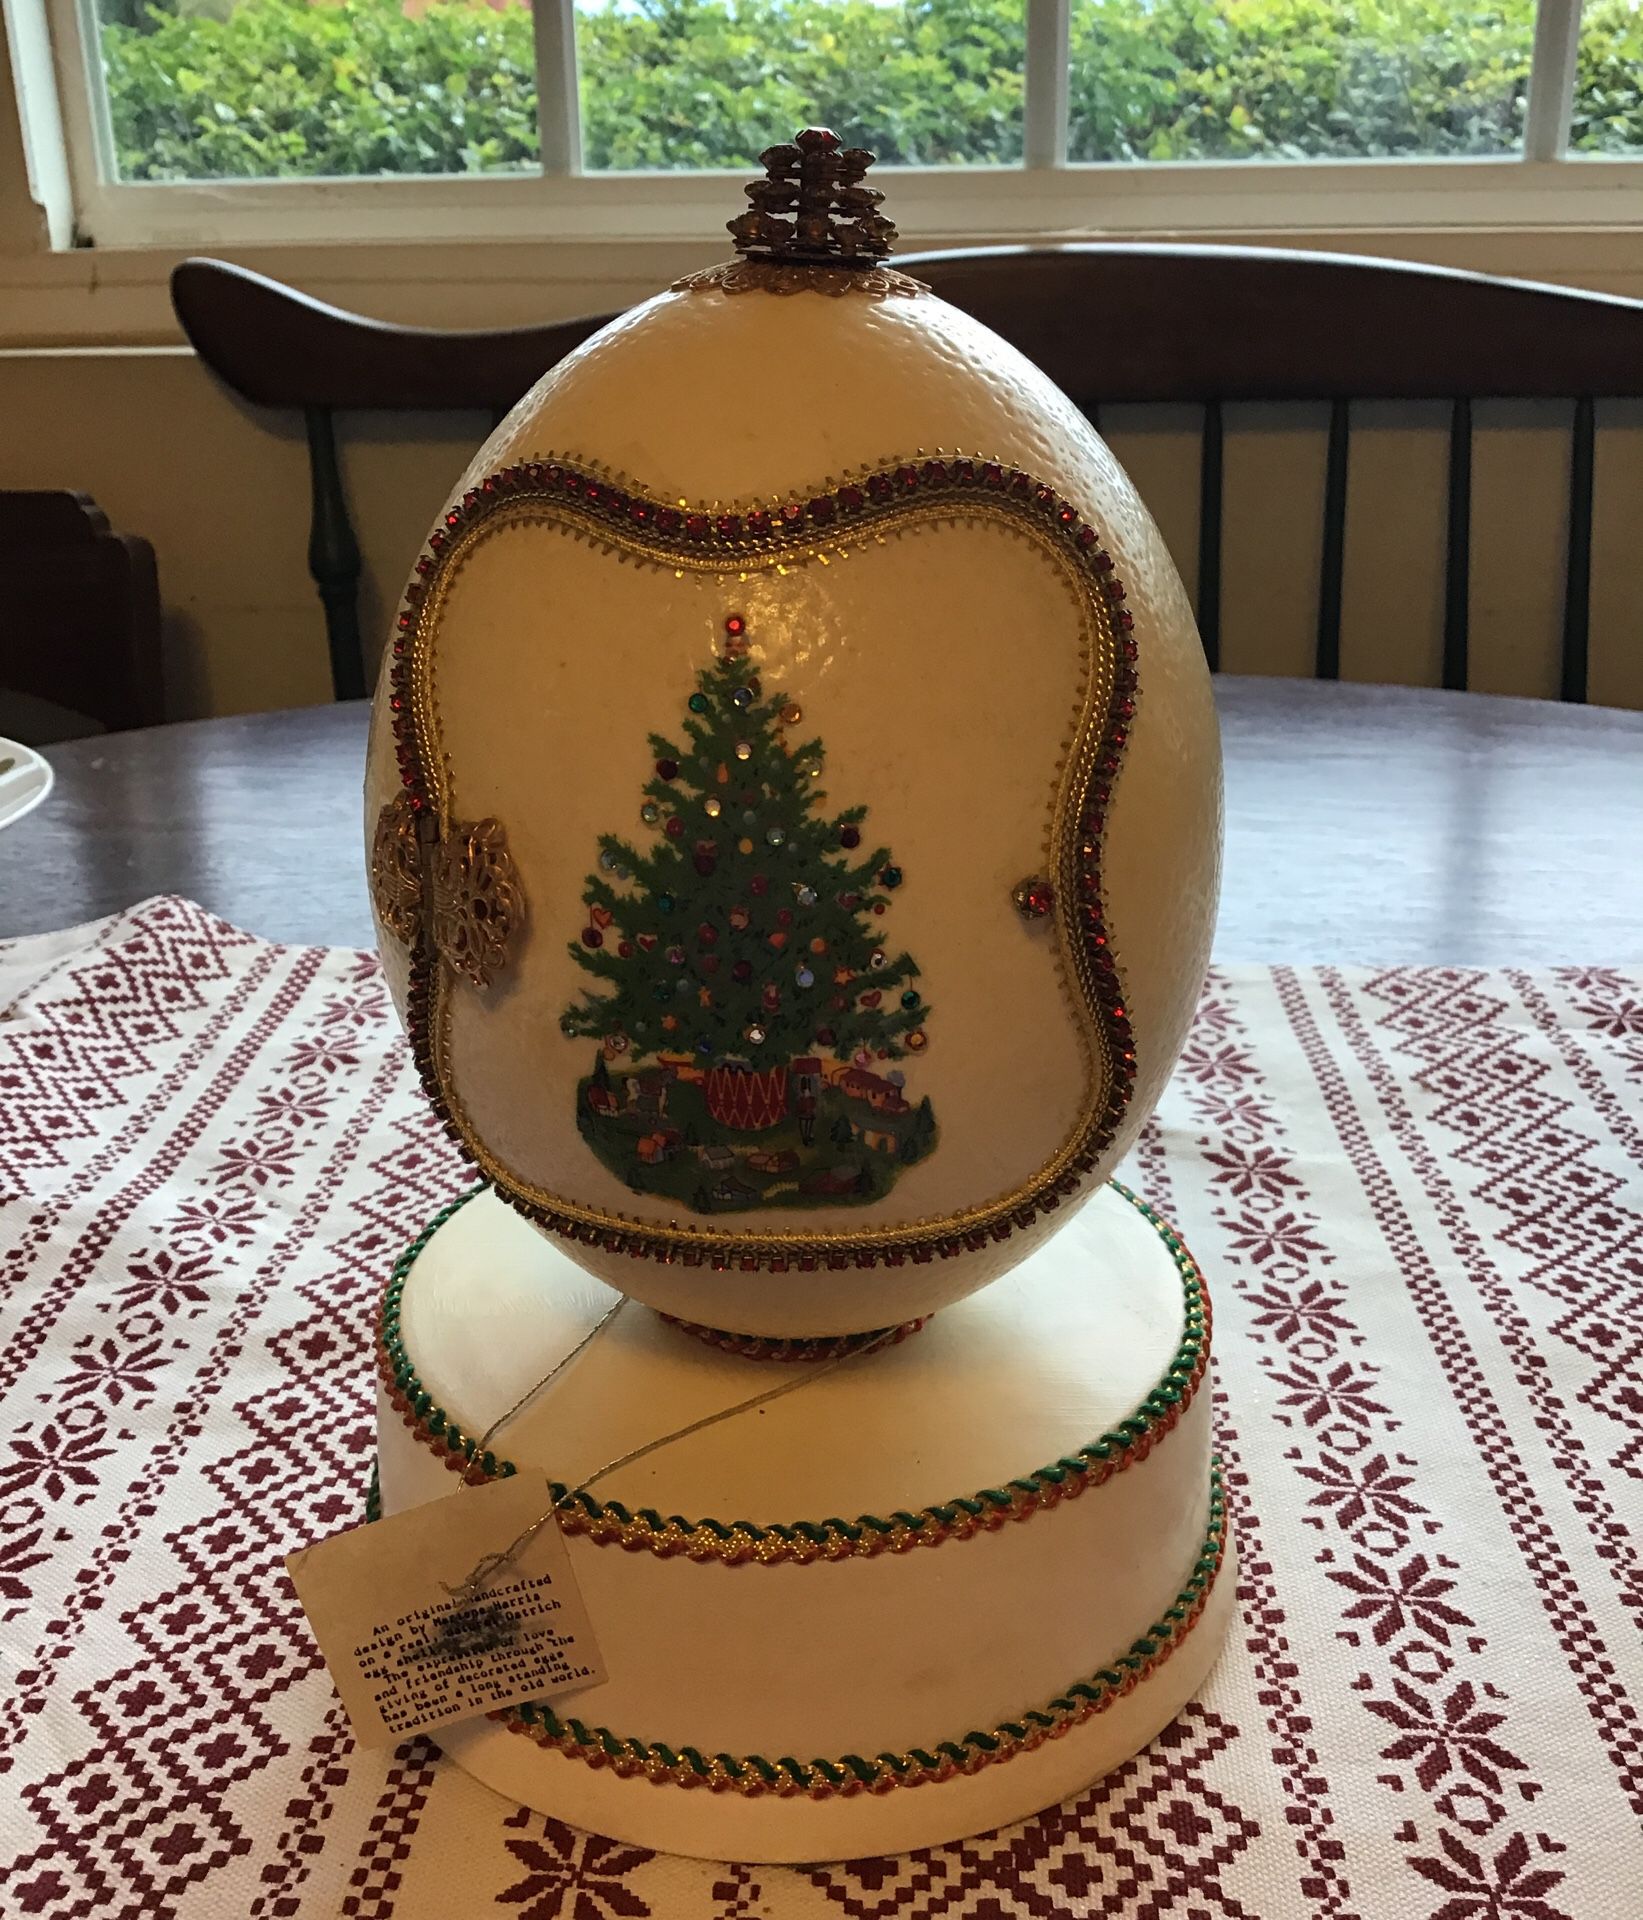 Vintage 1985 Ostrich Egg Music Box. Designed and signed by Marlene Harris. Gently used. Plays White Christmas, music works perfectly. Has the capabil